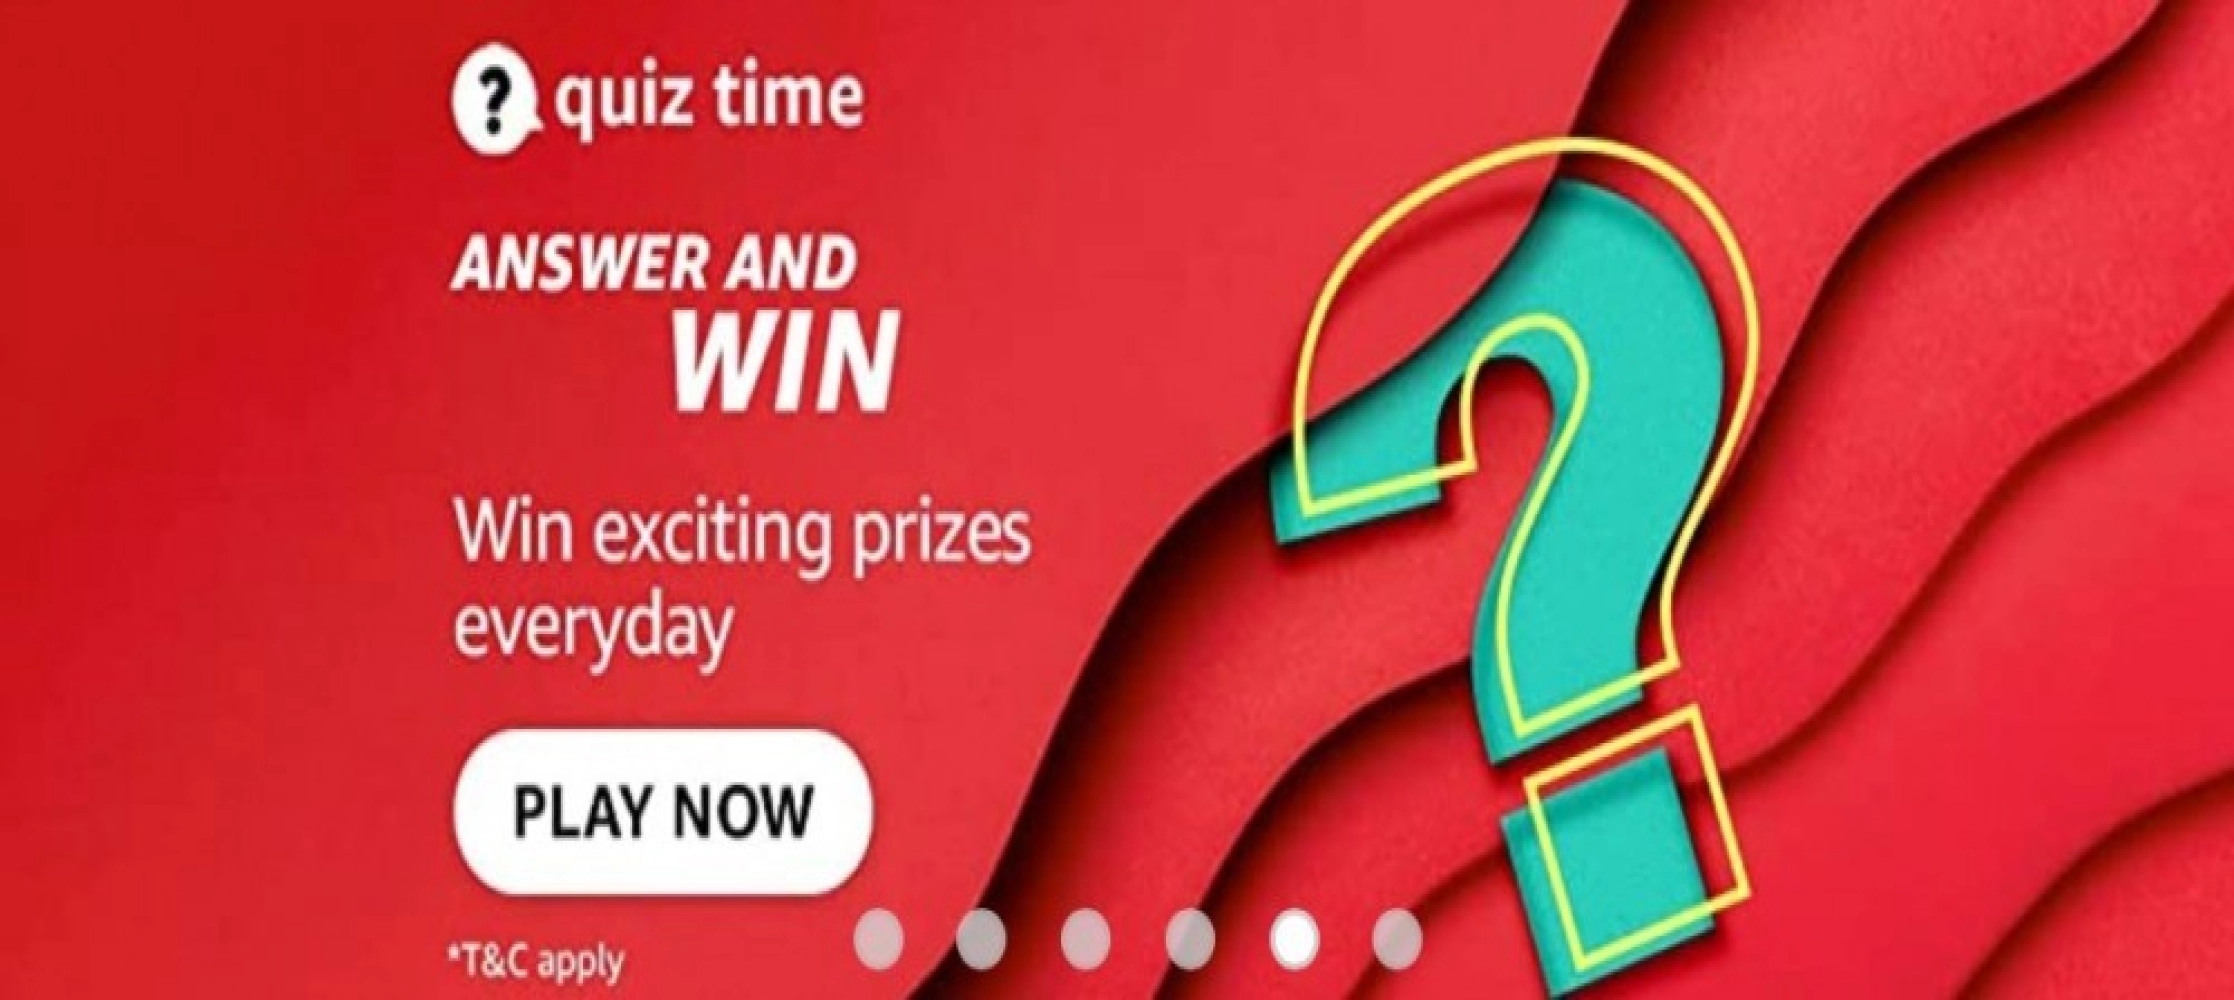 AMAZON QUIZ CONTEST: 11 MAY, 2022 - ANSWER TODAY FOR THE QUESTIONS AND GET A CHANCE TO WIN AMAZON PAY RS.10,000